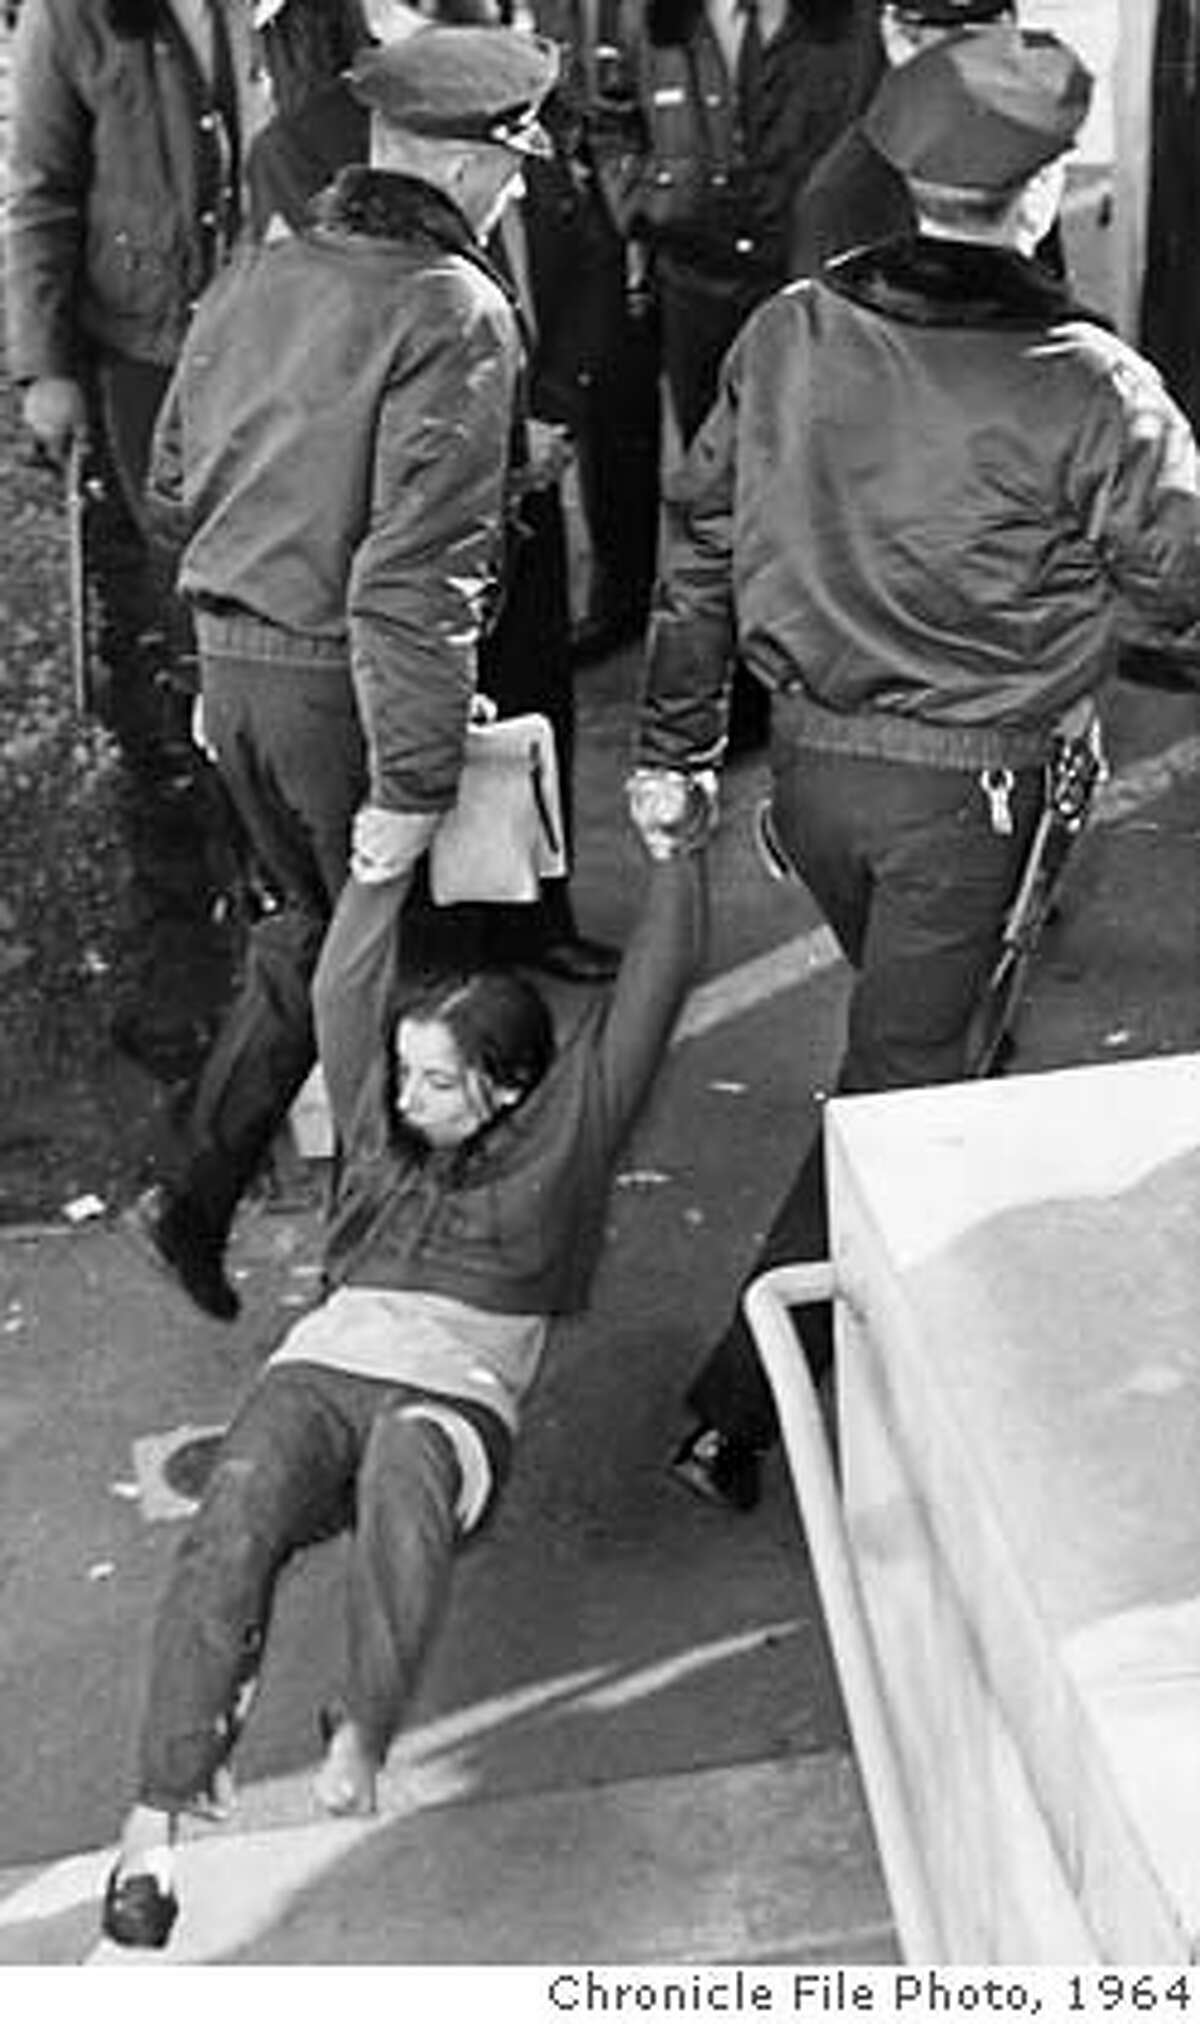 Police arrest protester at UC Berkeley, December 1964. Chronicle File Photo, 1964